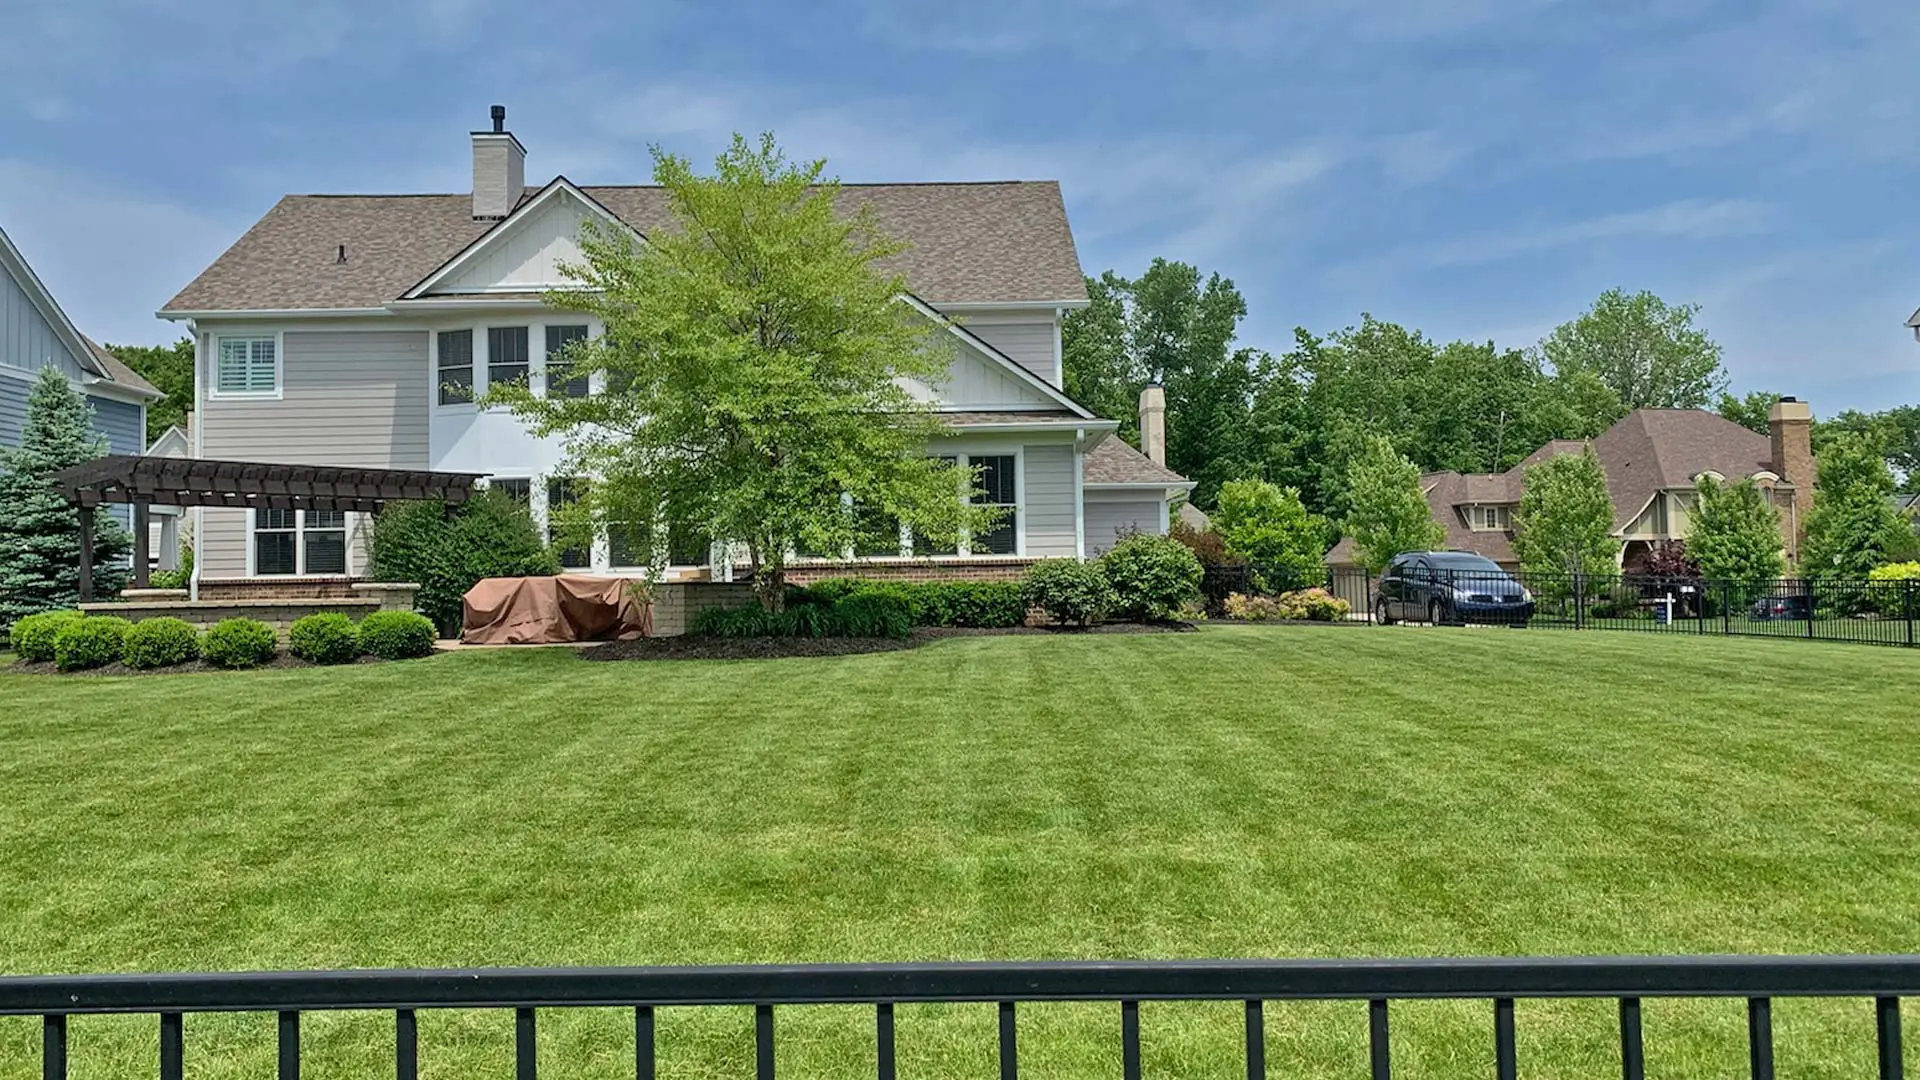 Beautifully trimmed and pruned hedges and mowed lawn of a Noblesville homeowner.